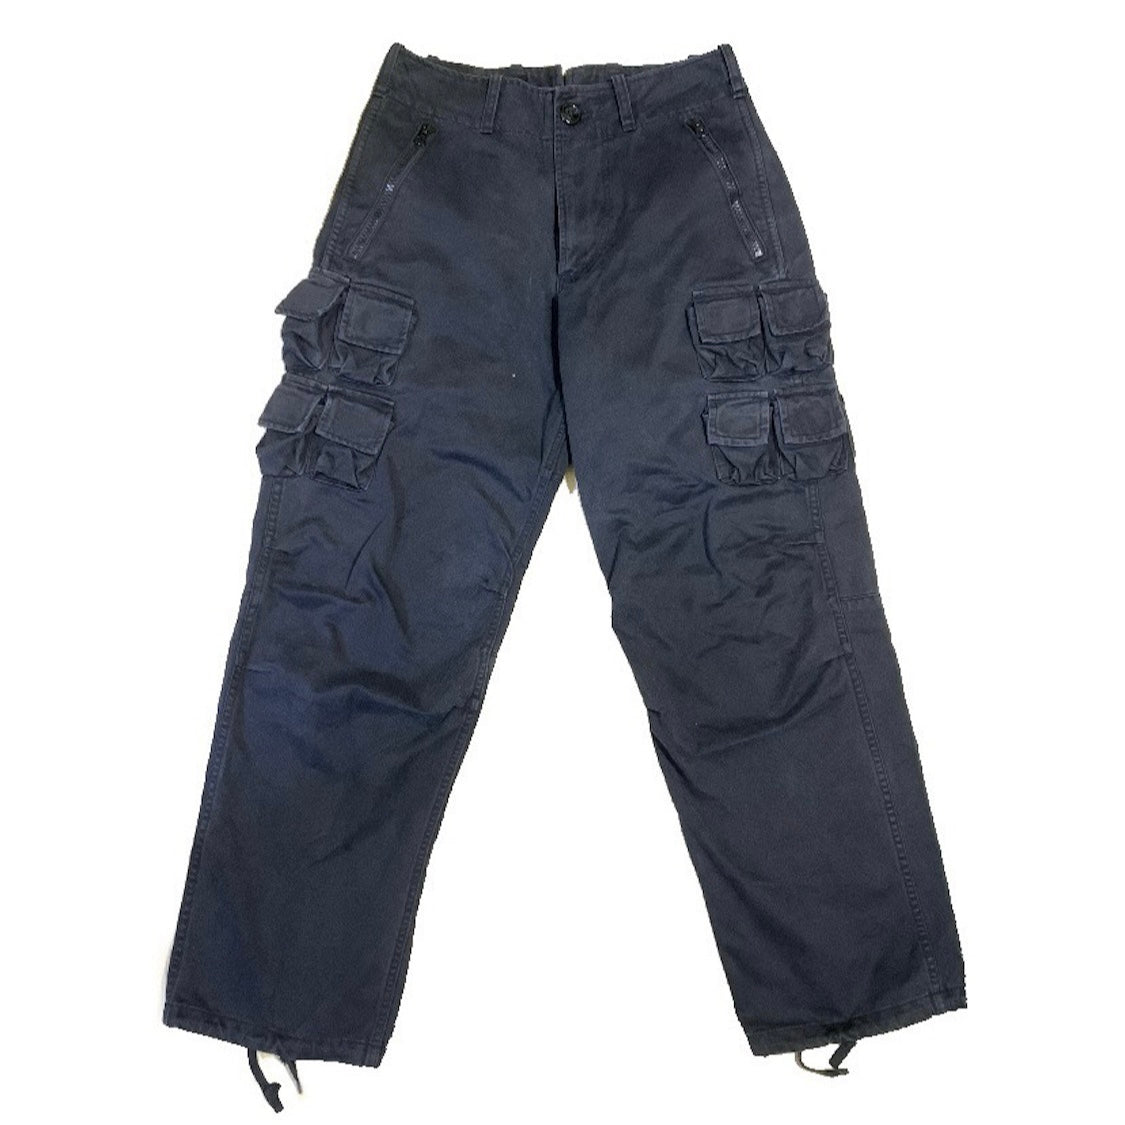 GENERAL RESEARCH 1998AW PARASITE 16 POCKET CARGO PANTS